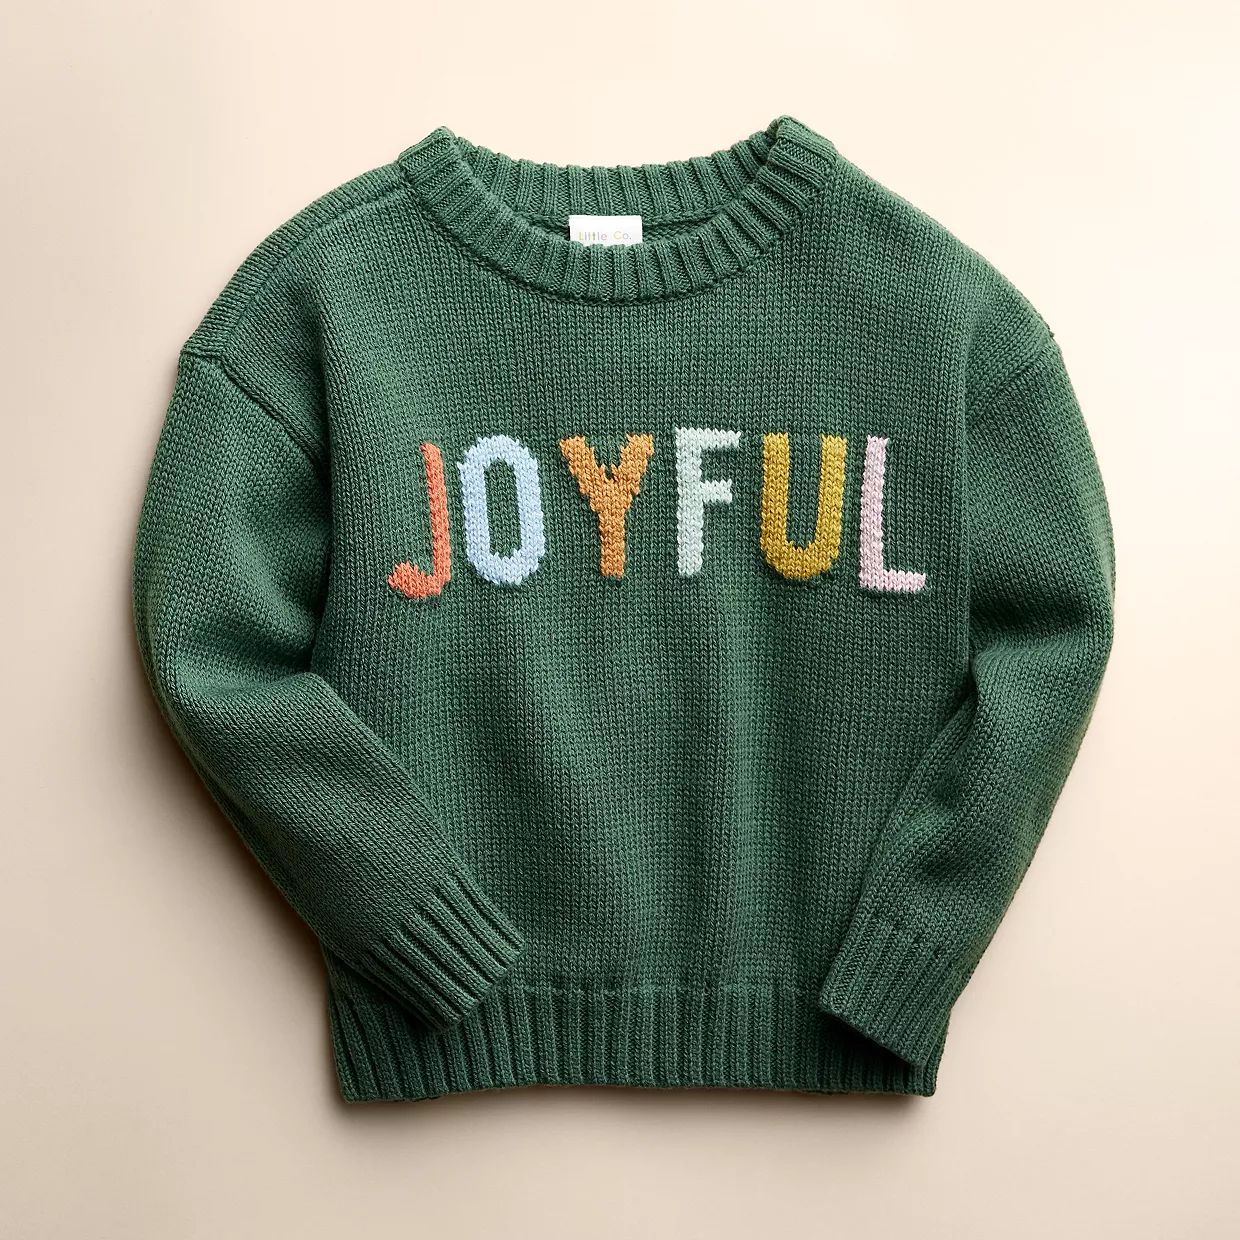 Kids 4-12 Little Co. by Lauren Conrad Holiday Sweater | Kohl's